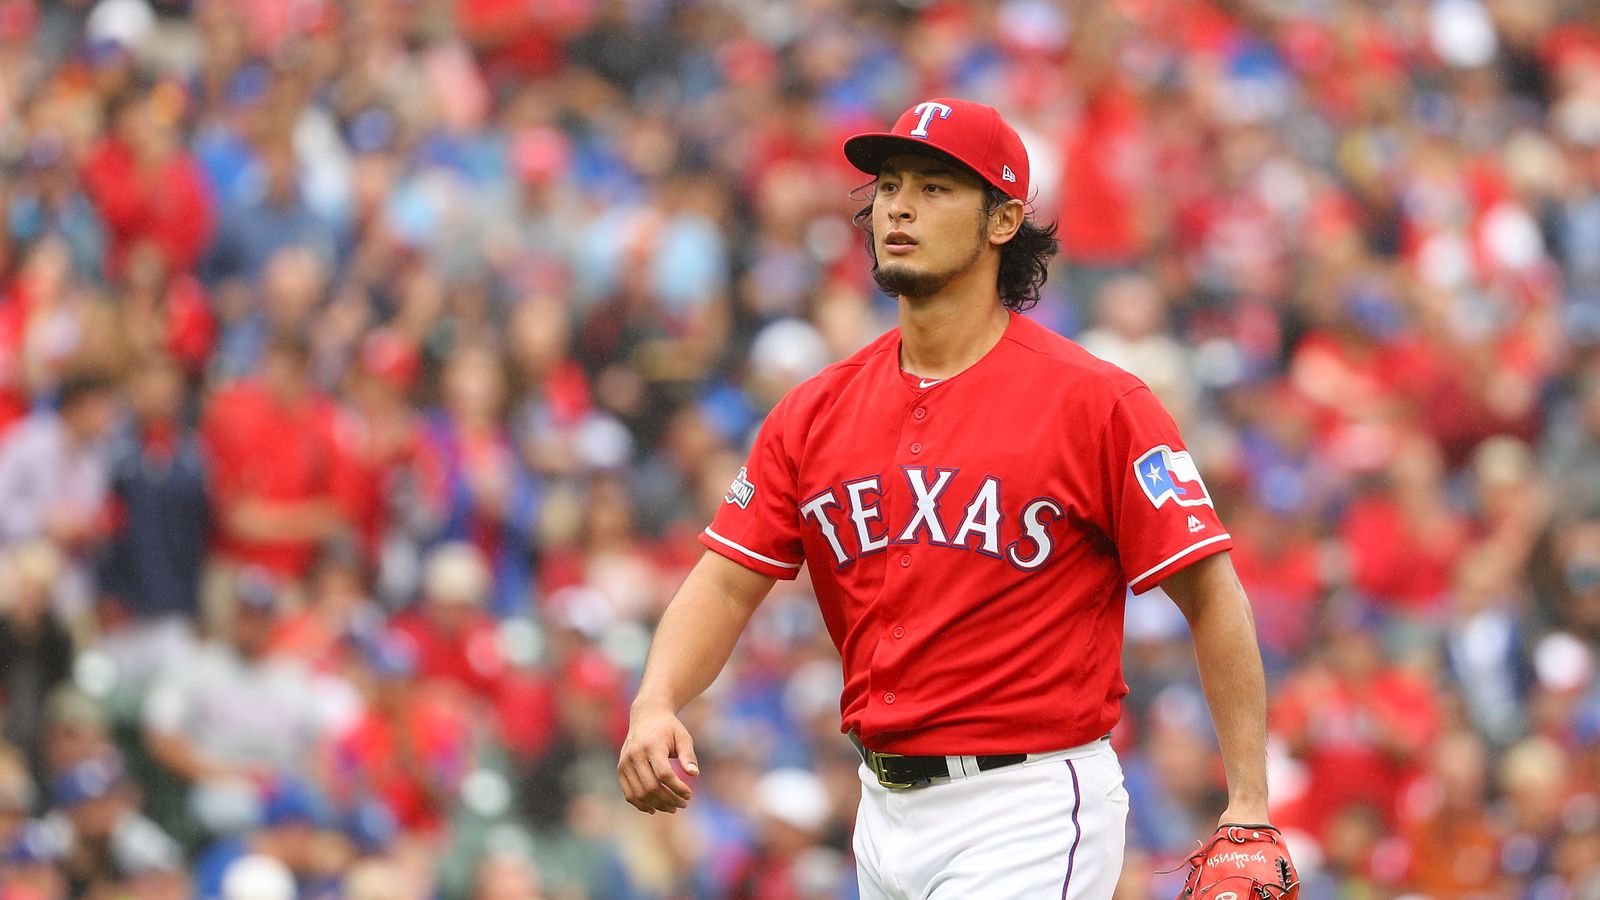 Yu Darvish's father banned from United States (UPDATE) - Lone Star Ball